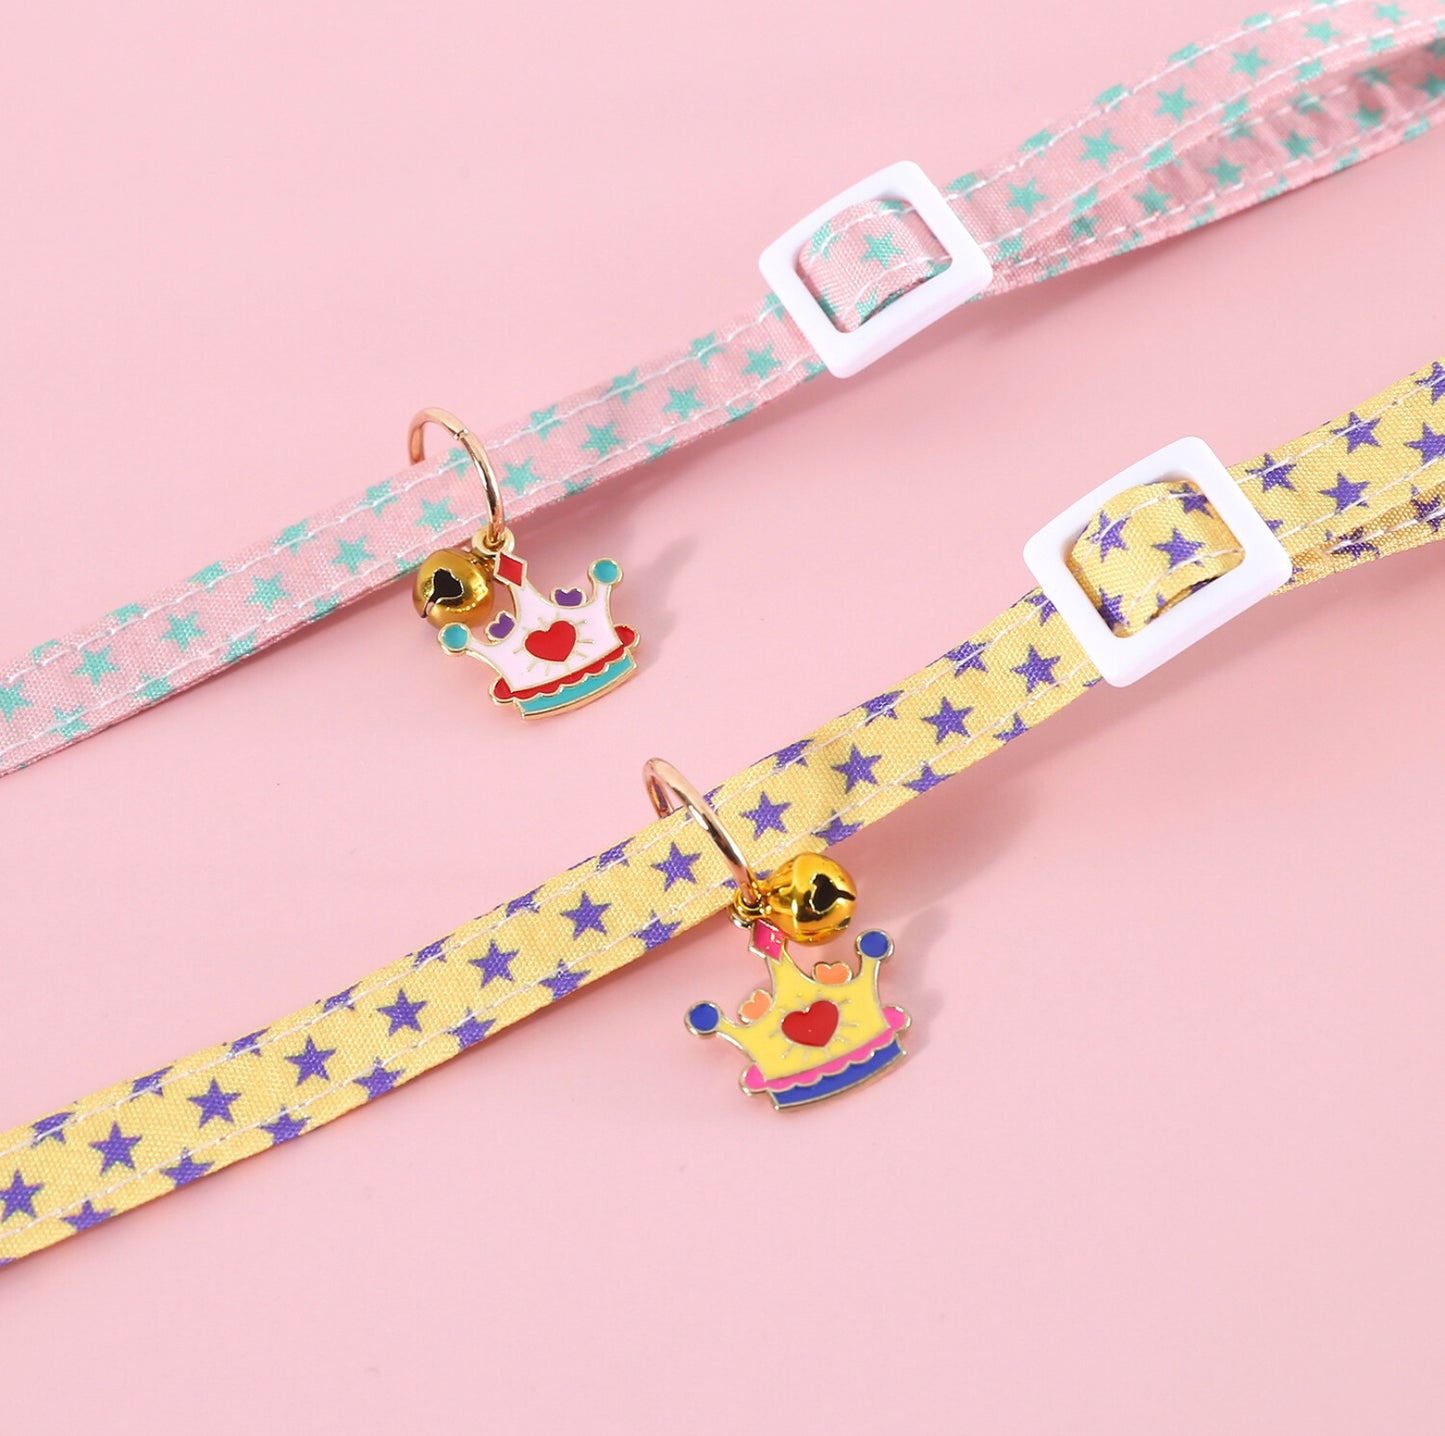 Crown-Styled Pendant Pet Collar with Adjustable Safety Buckle